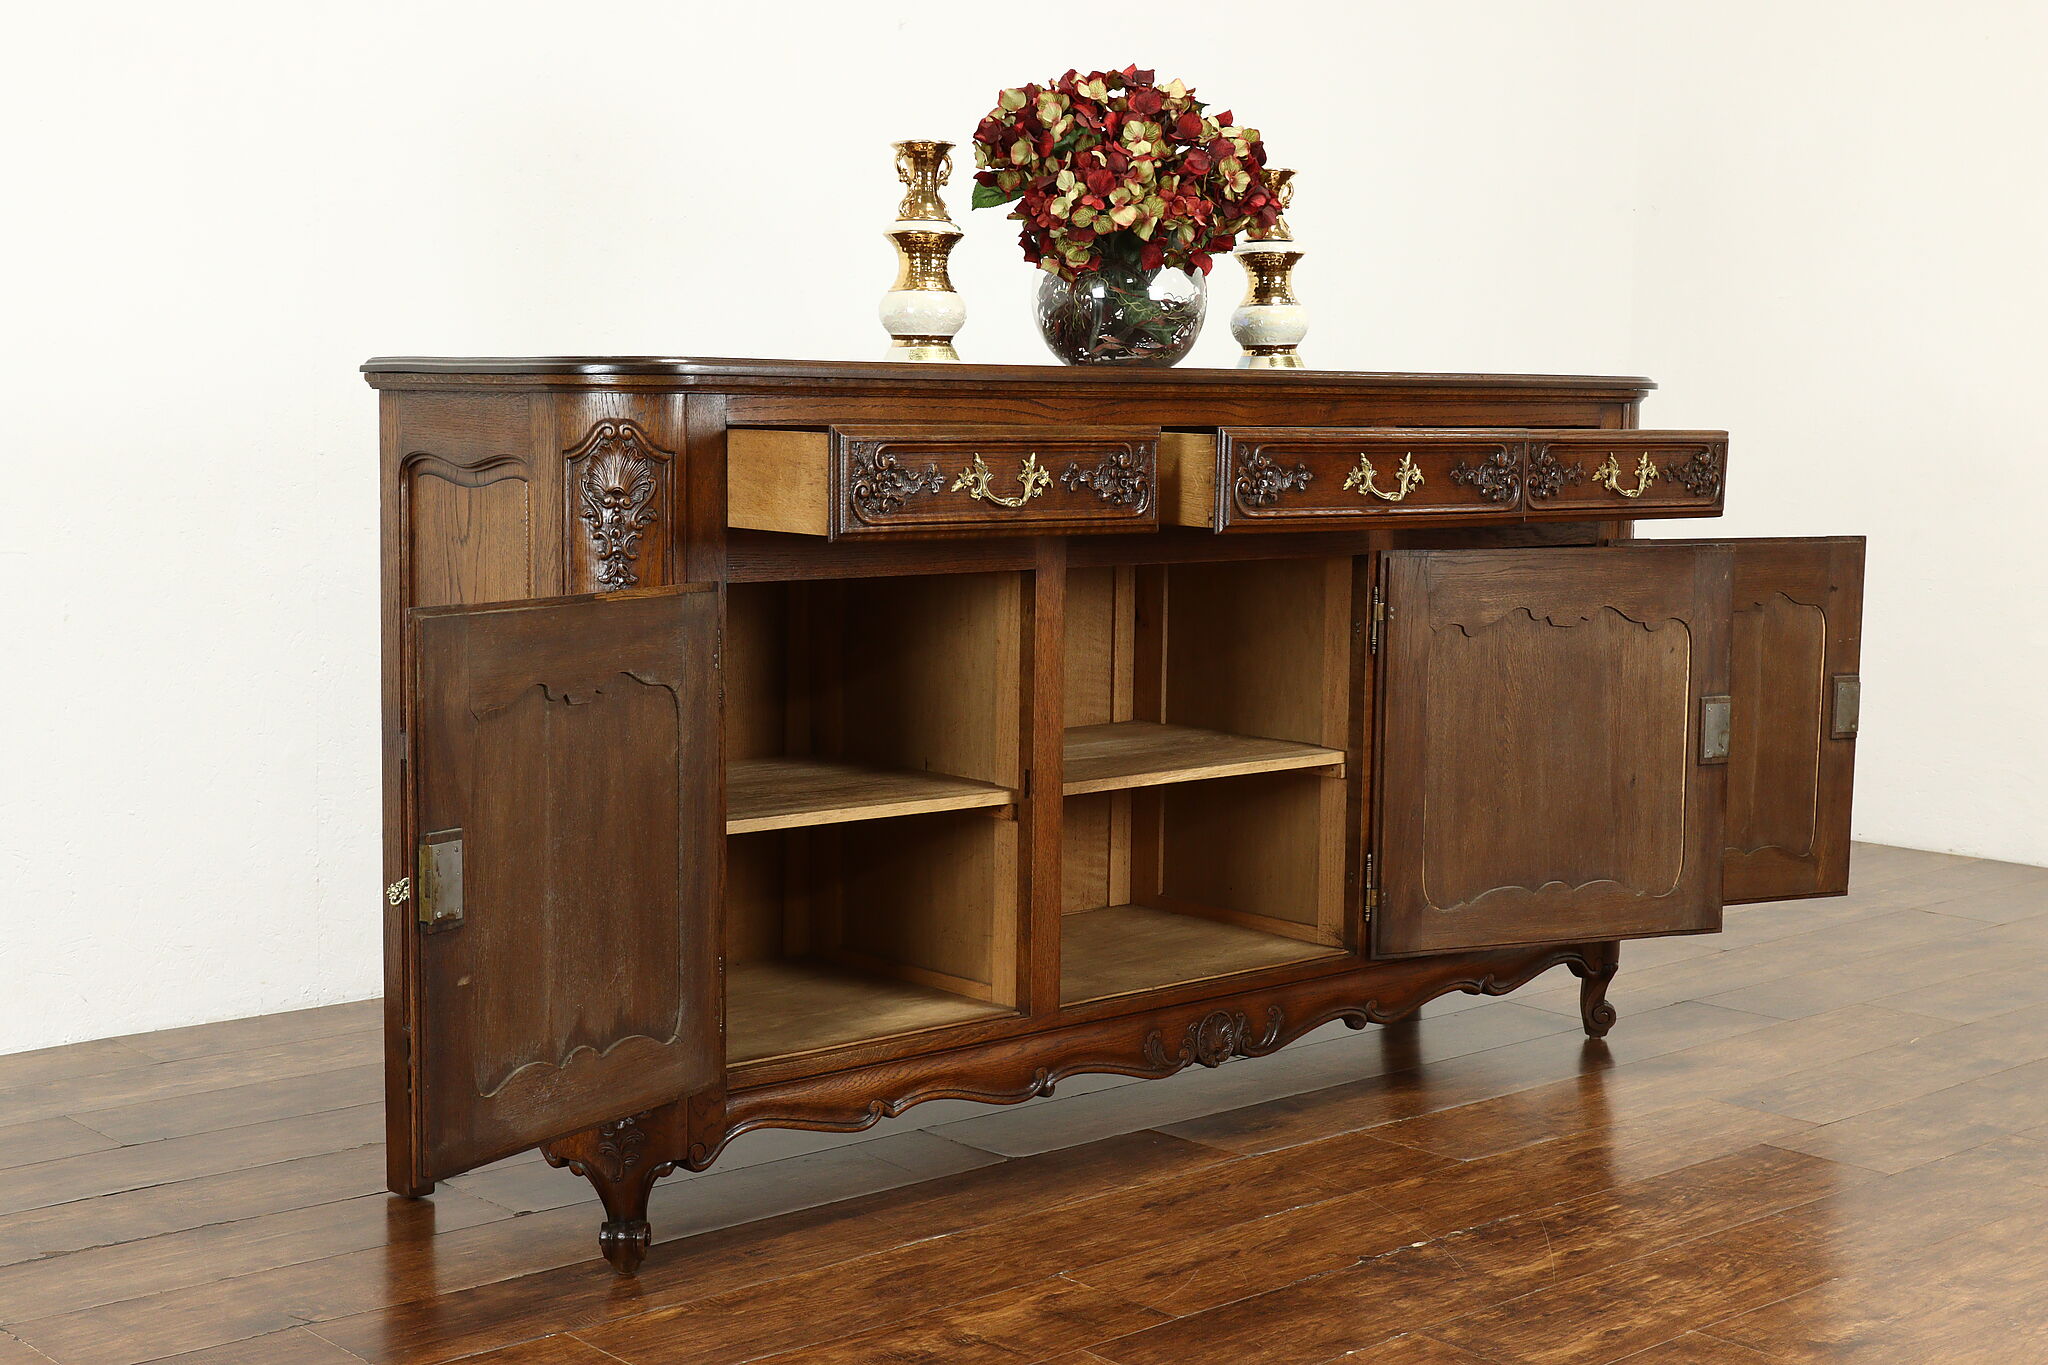 Country French Provincial Antique Oak Sideboard, Server or TV Console